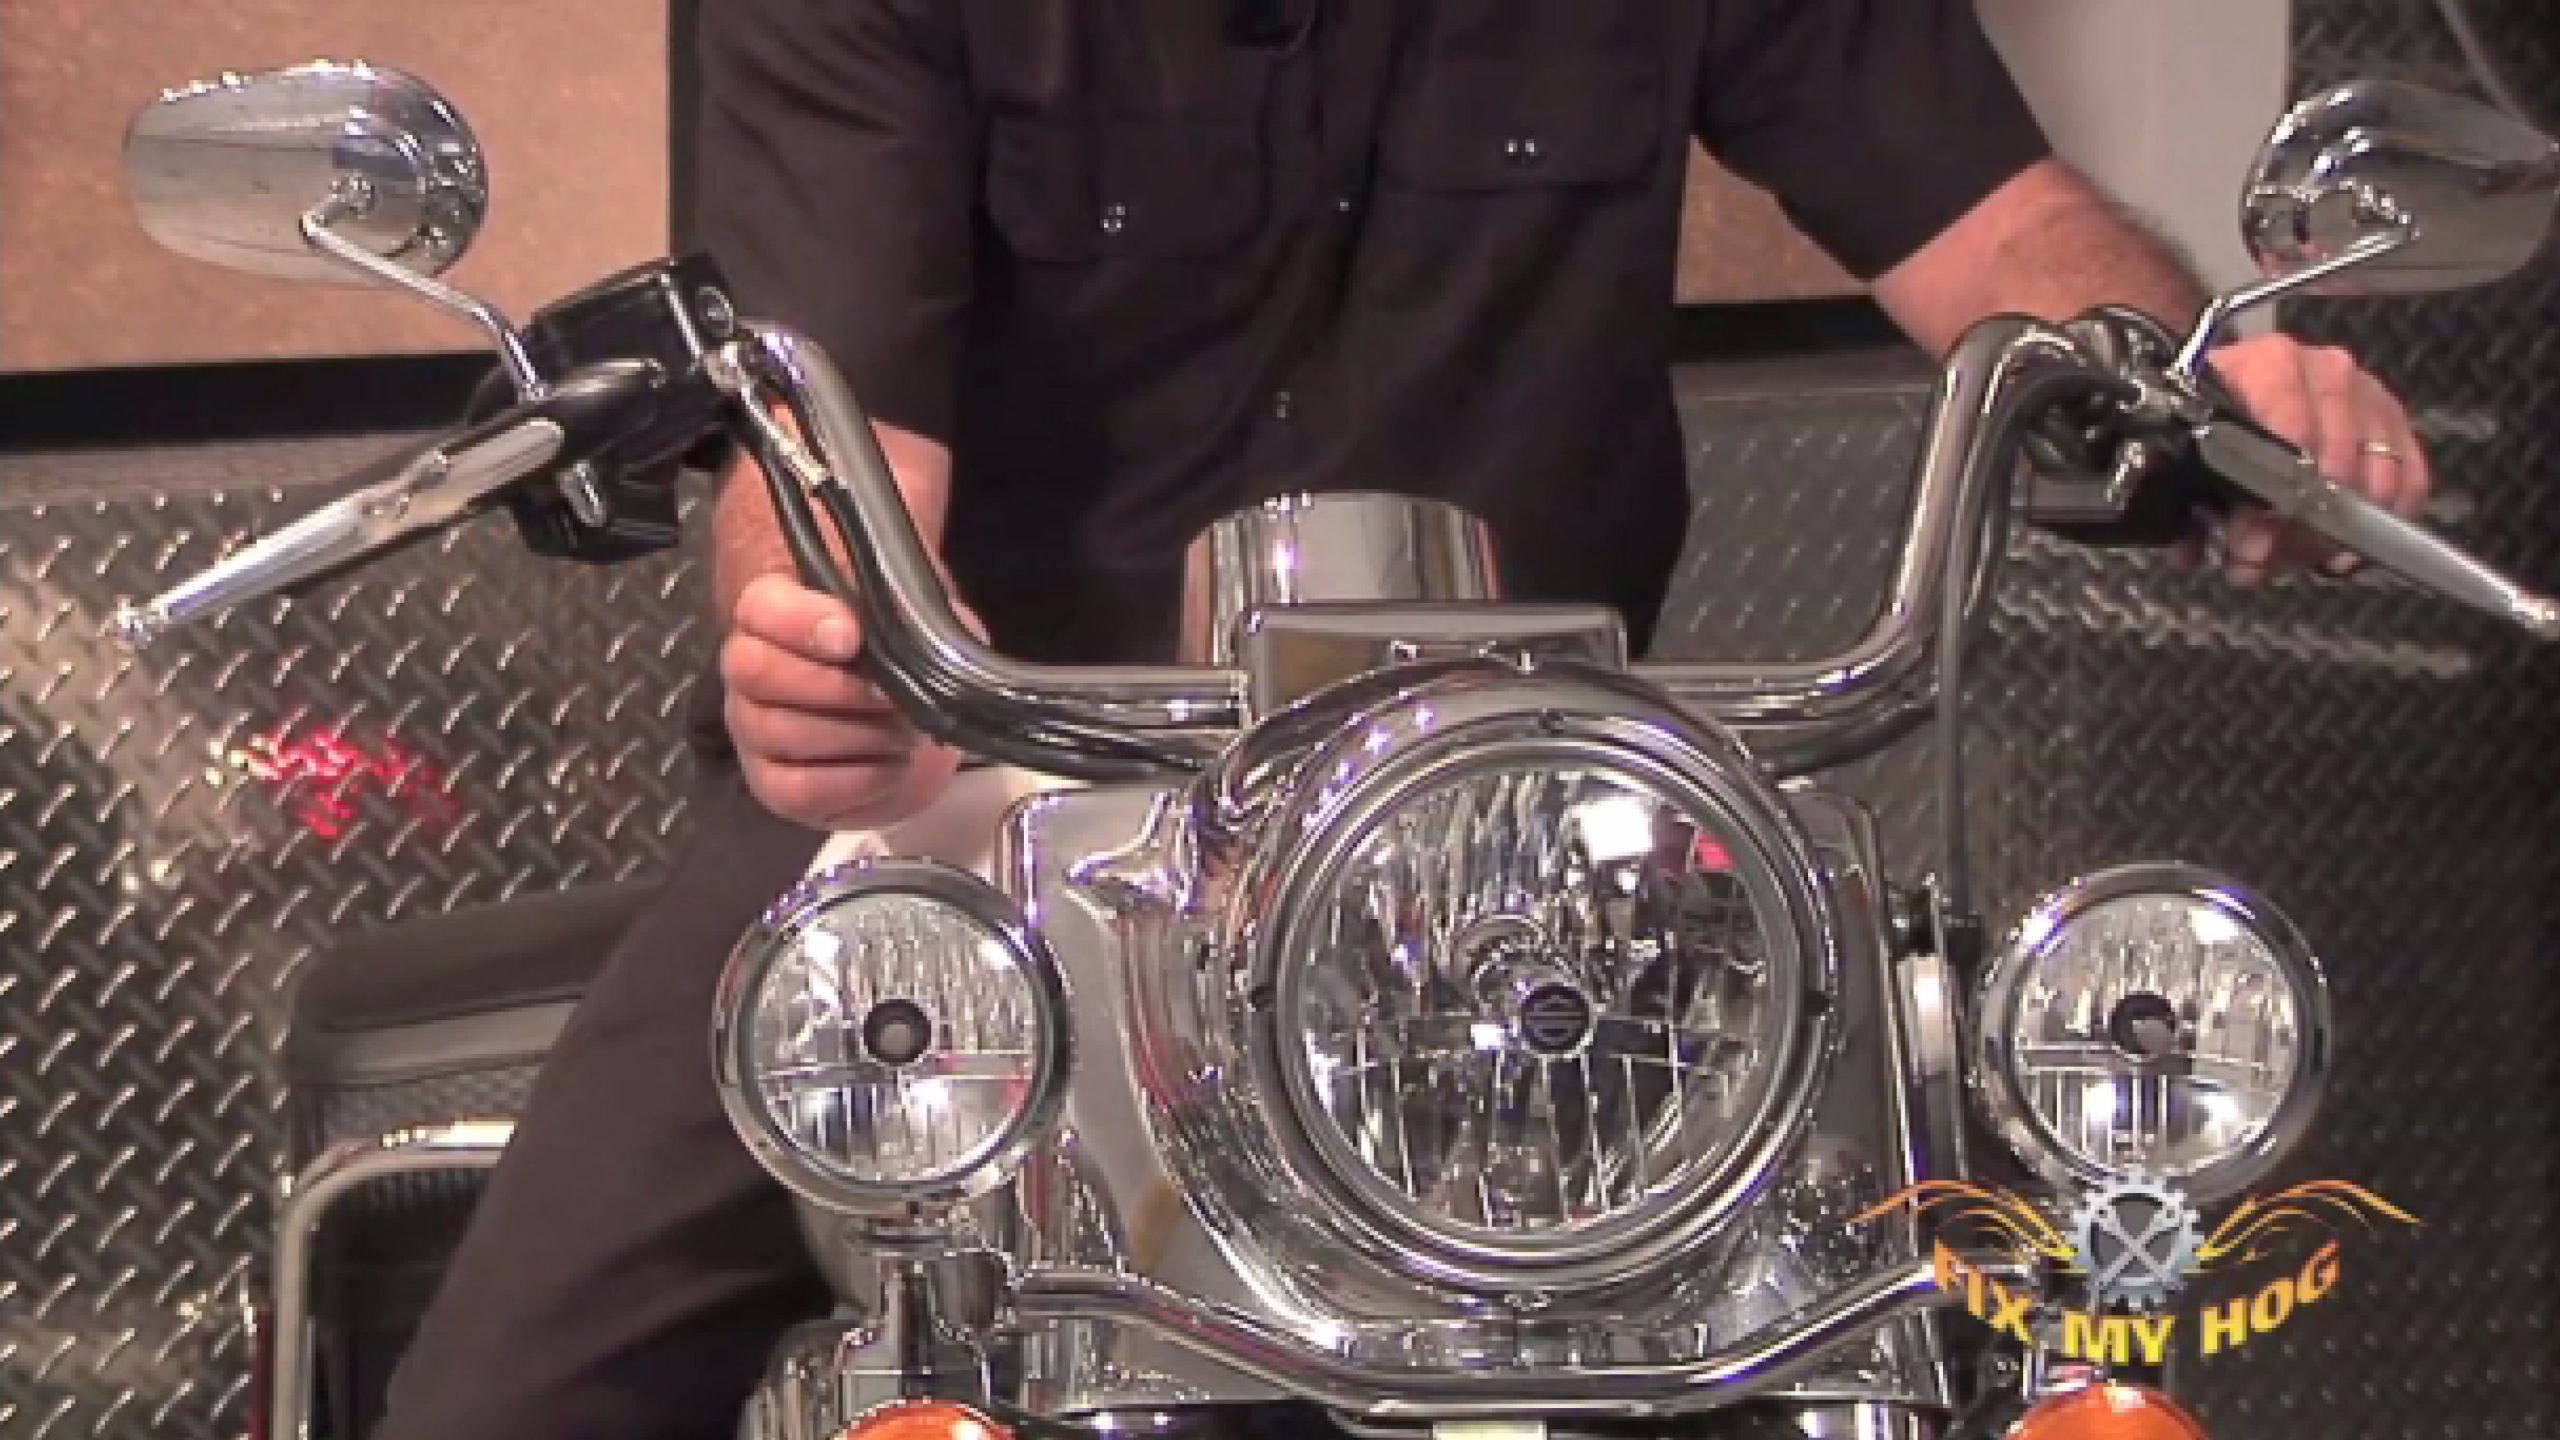 Tips for When Your Harley Won't Start - Electrical Cleaner in Switch Housing